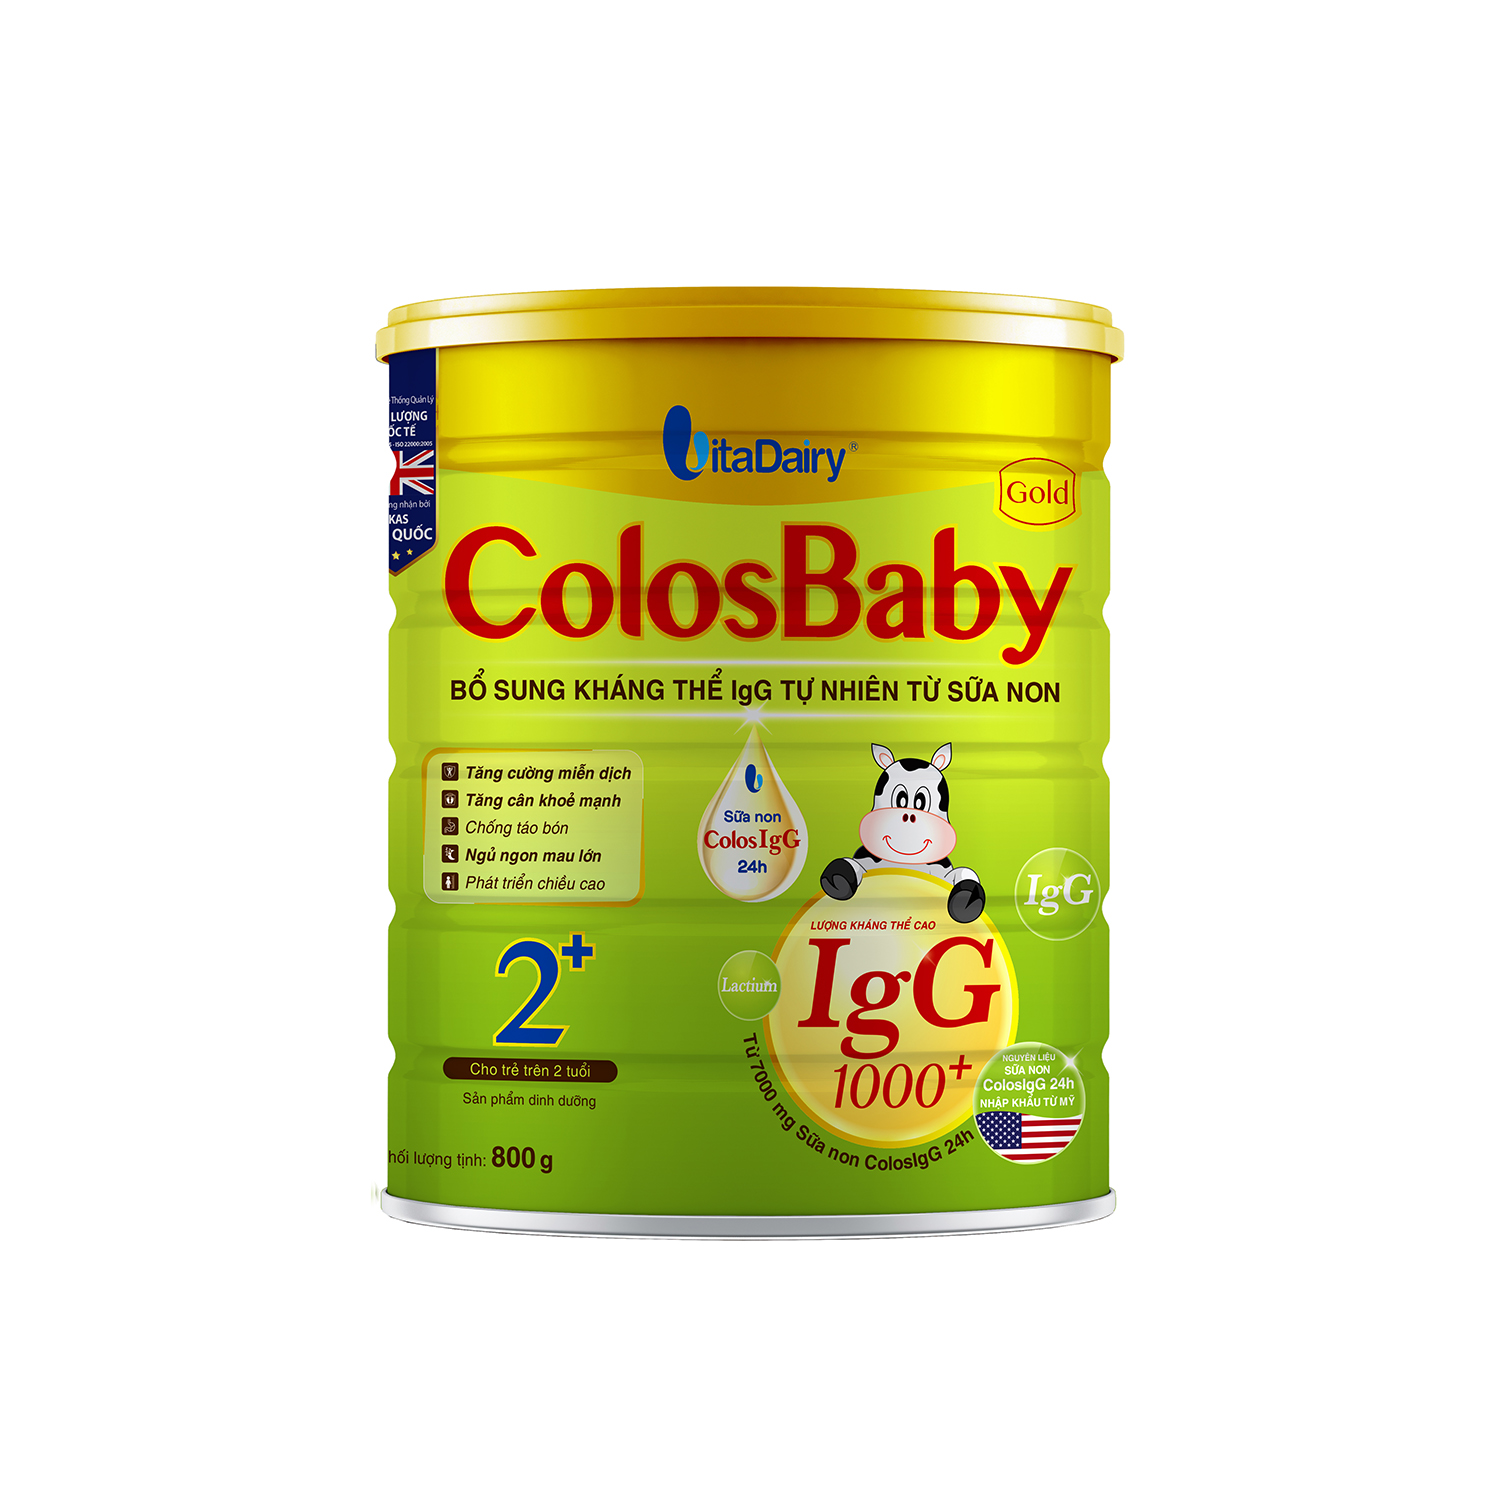 Colosbaby-co-may-loai-7